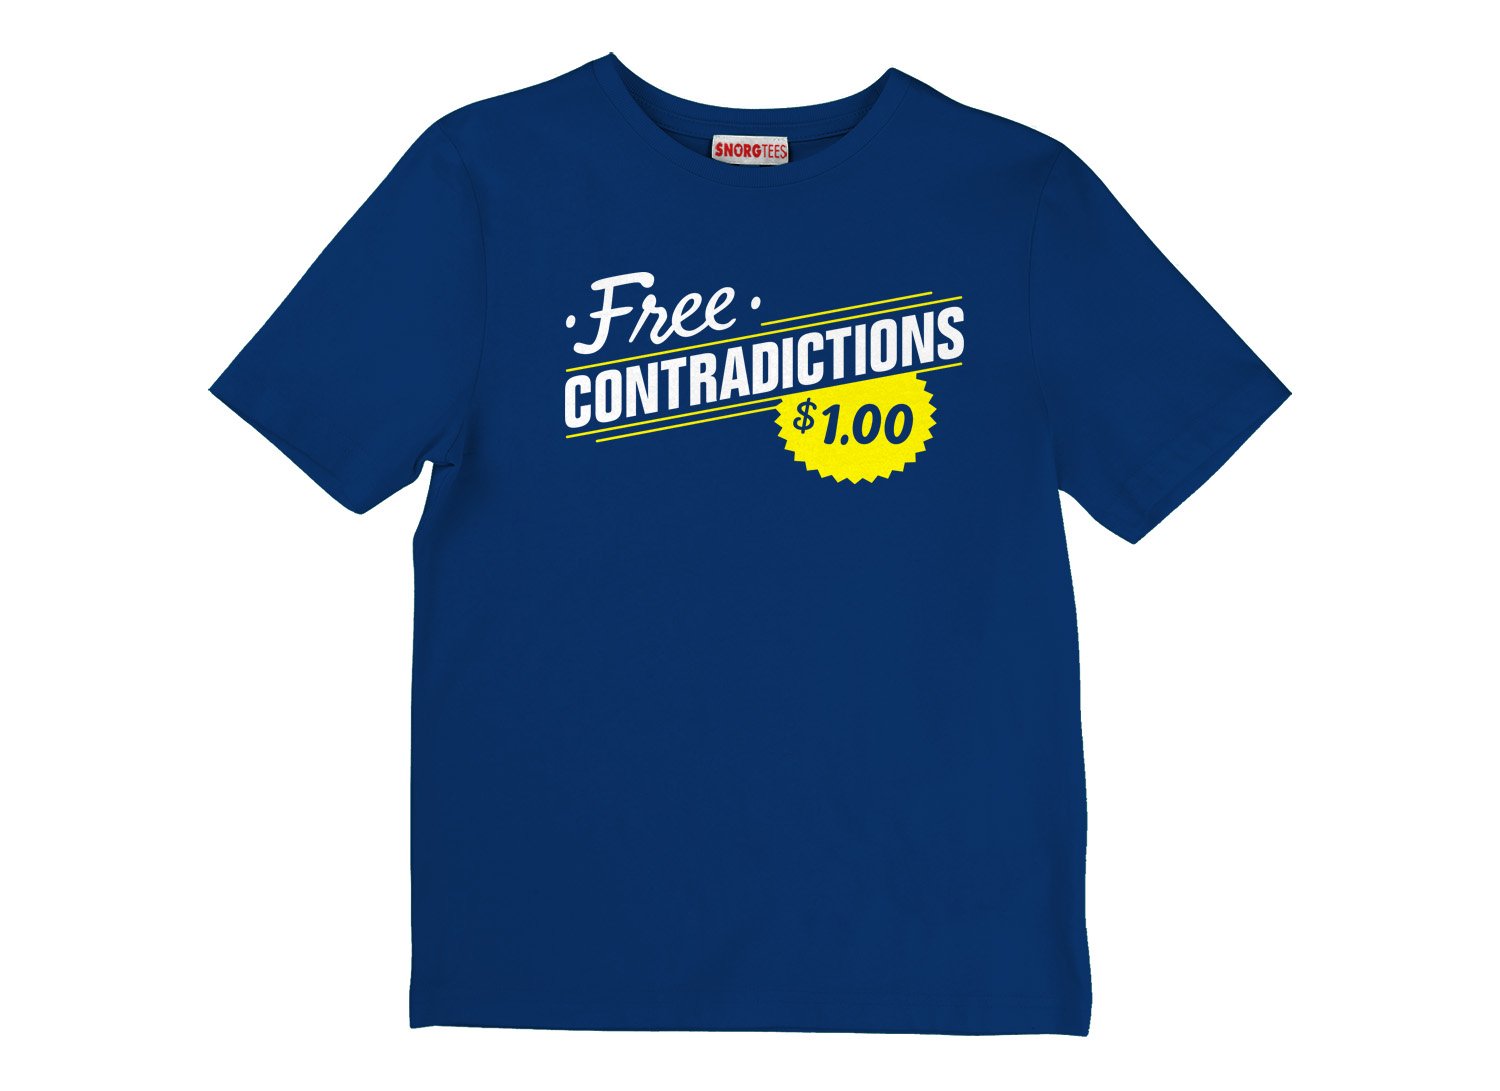 Free Contradictions T Shirt Image2